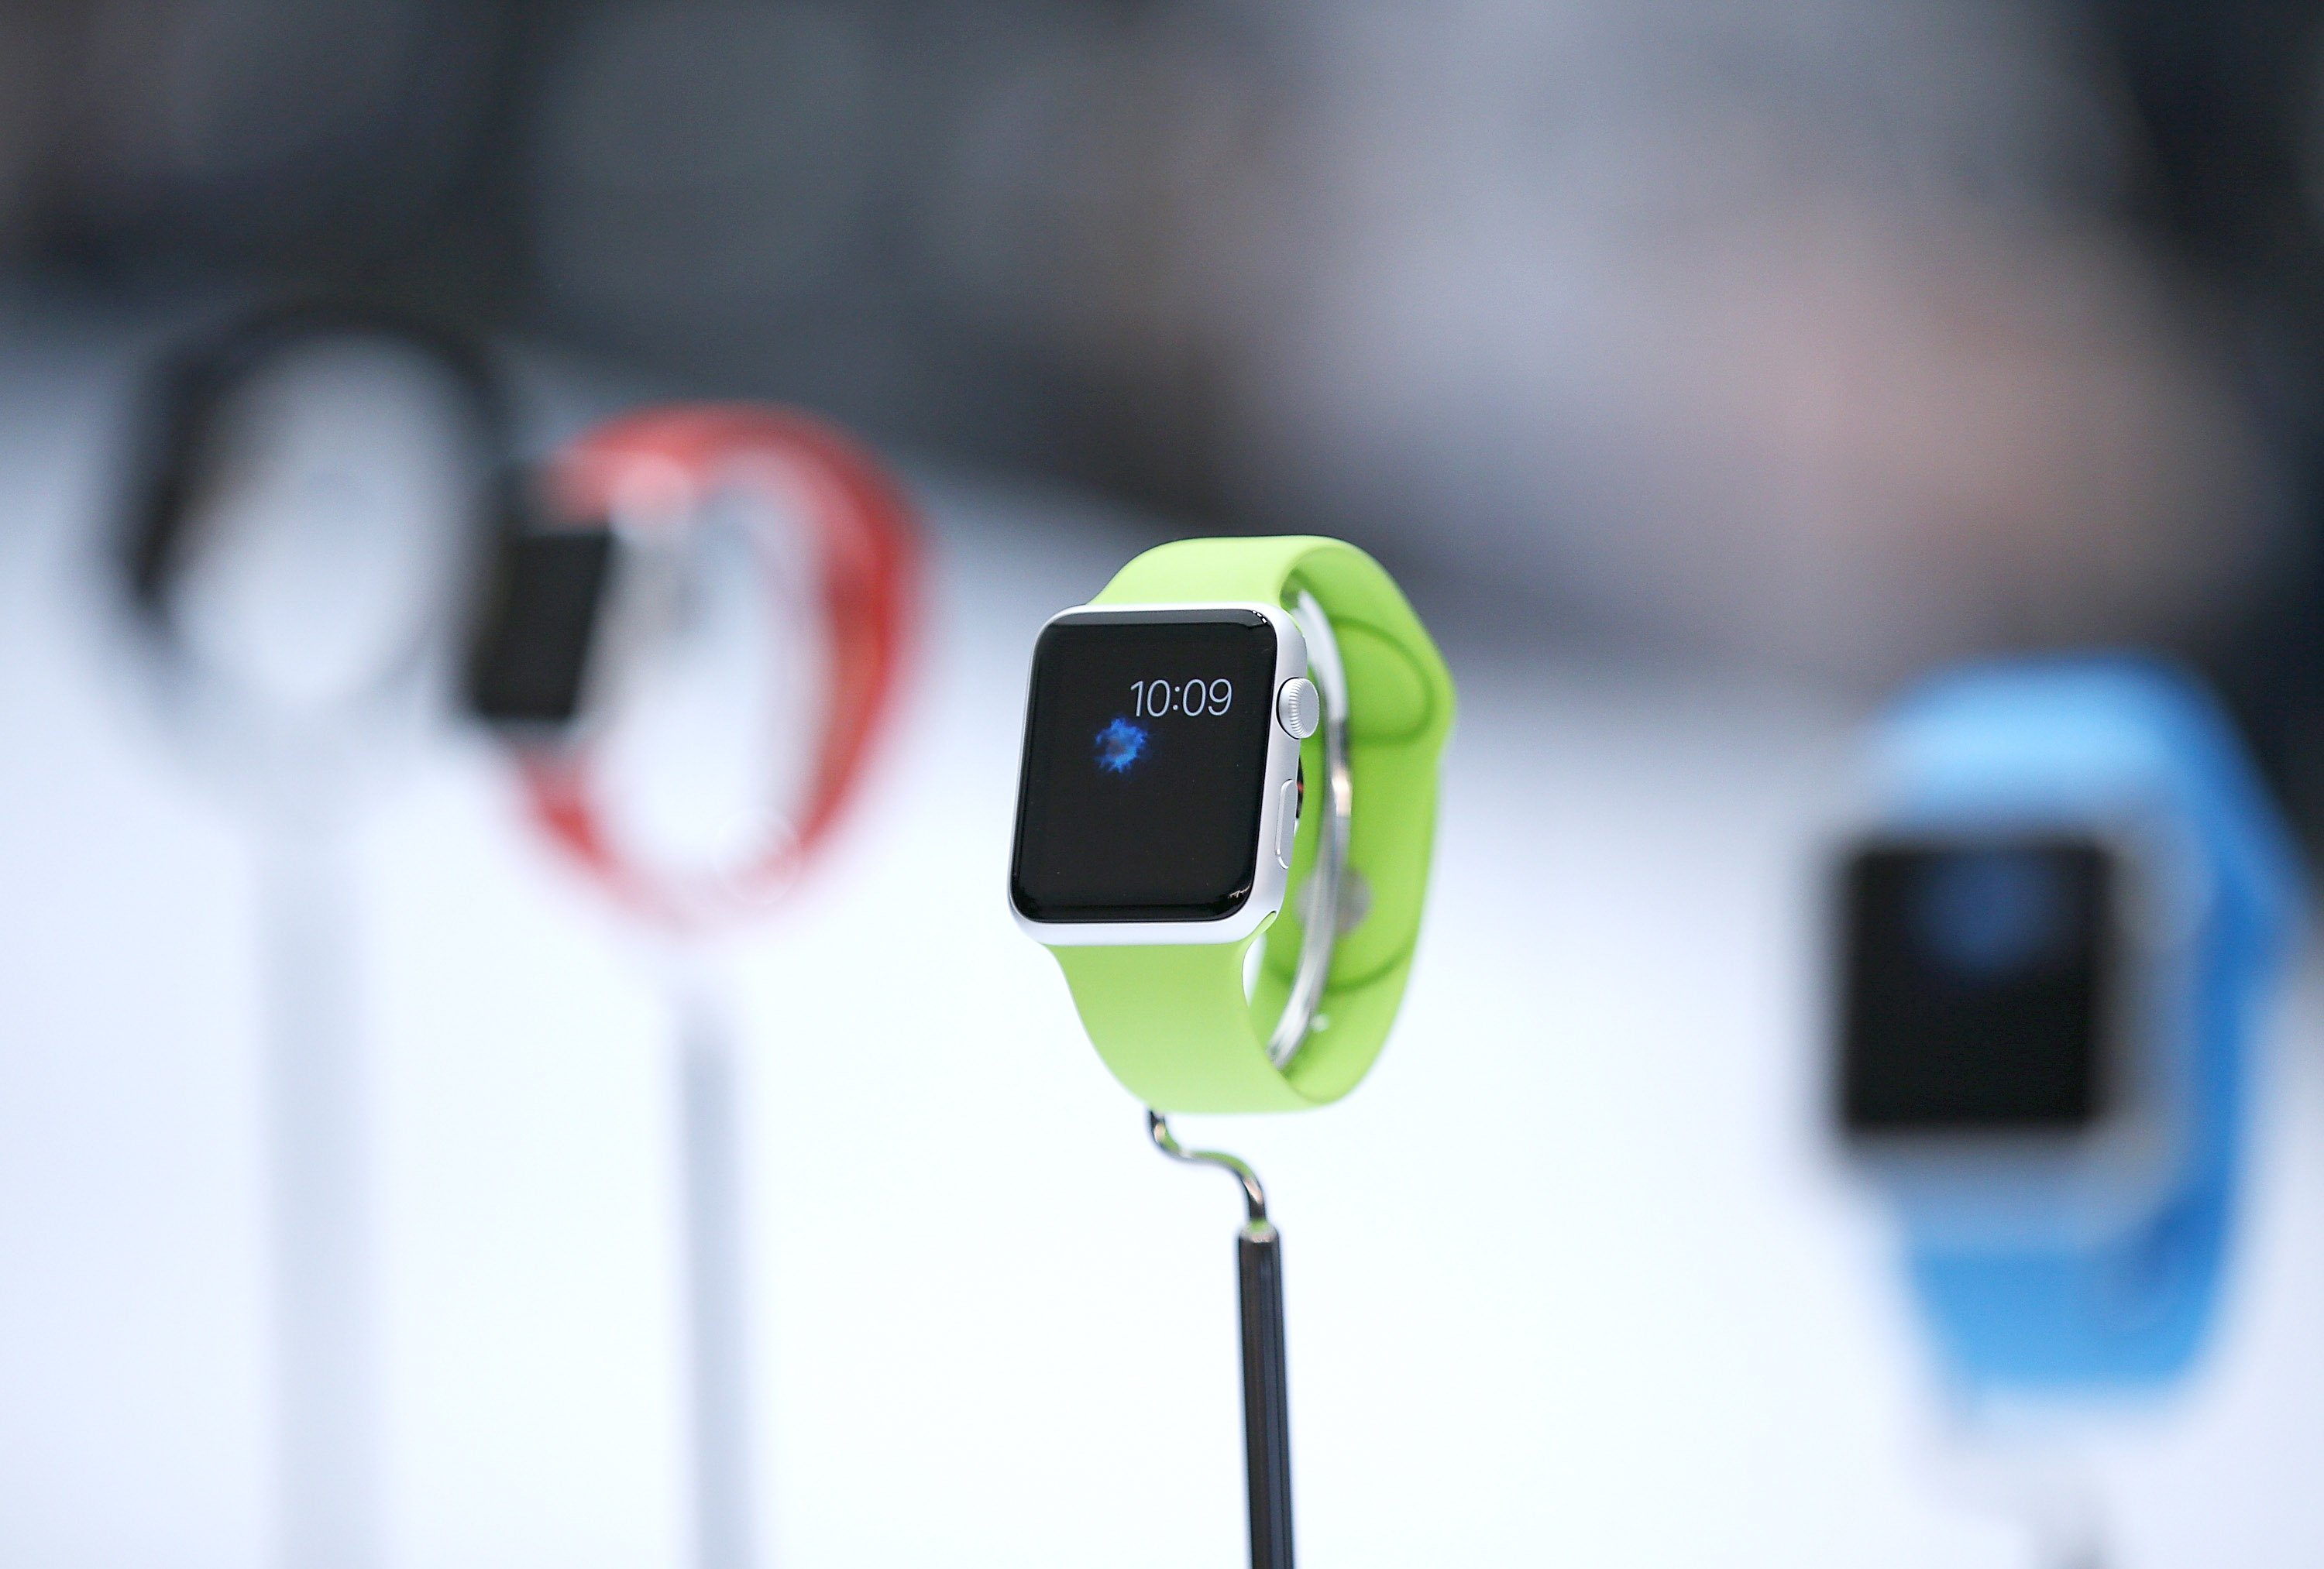 The new Apple Watch is displayed during an Apple special event at the Flint Center for the Performing Arts on Sept. 9, 2014 in Cupertino, Calif. 